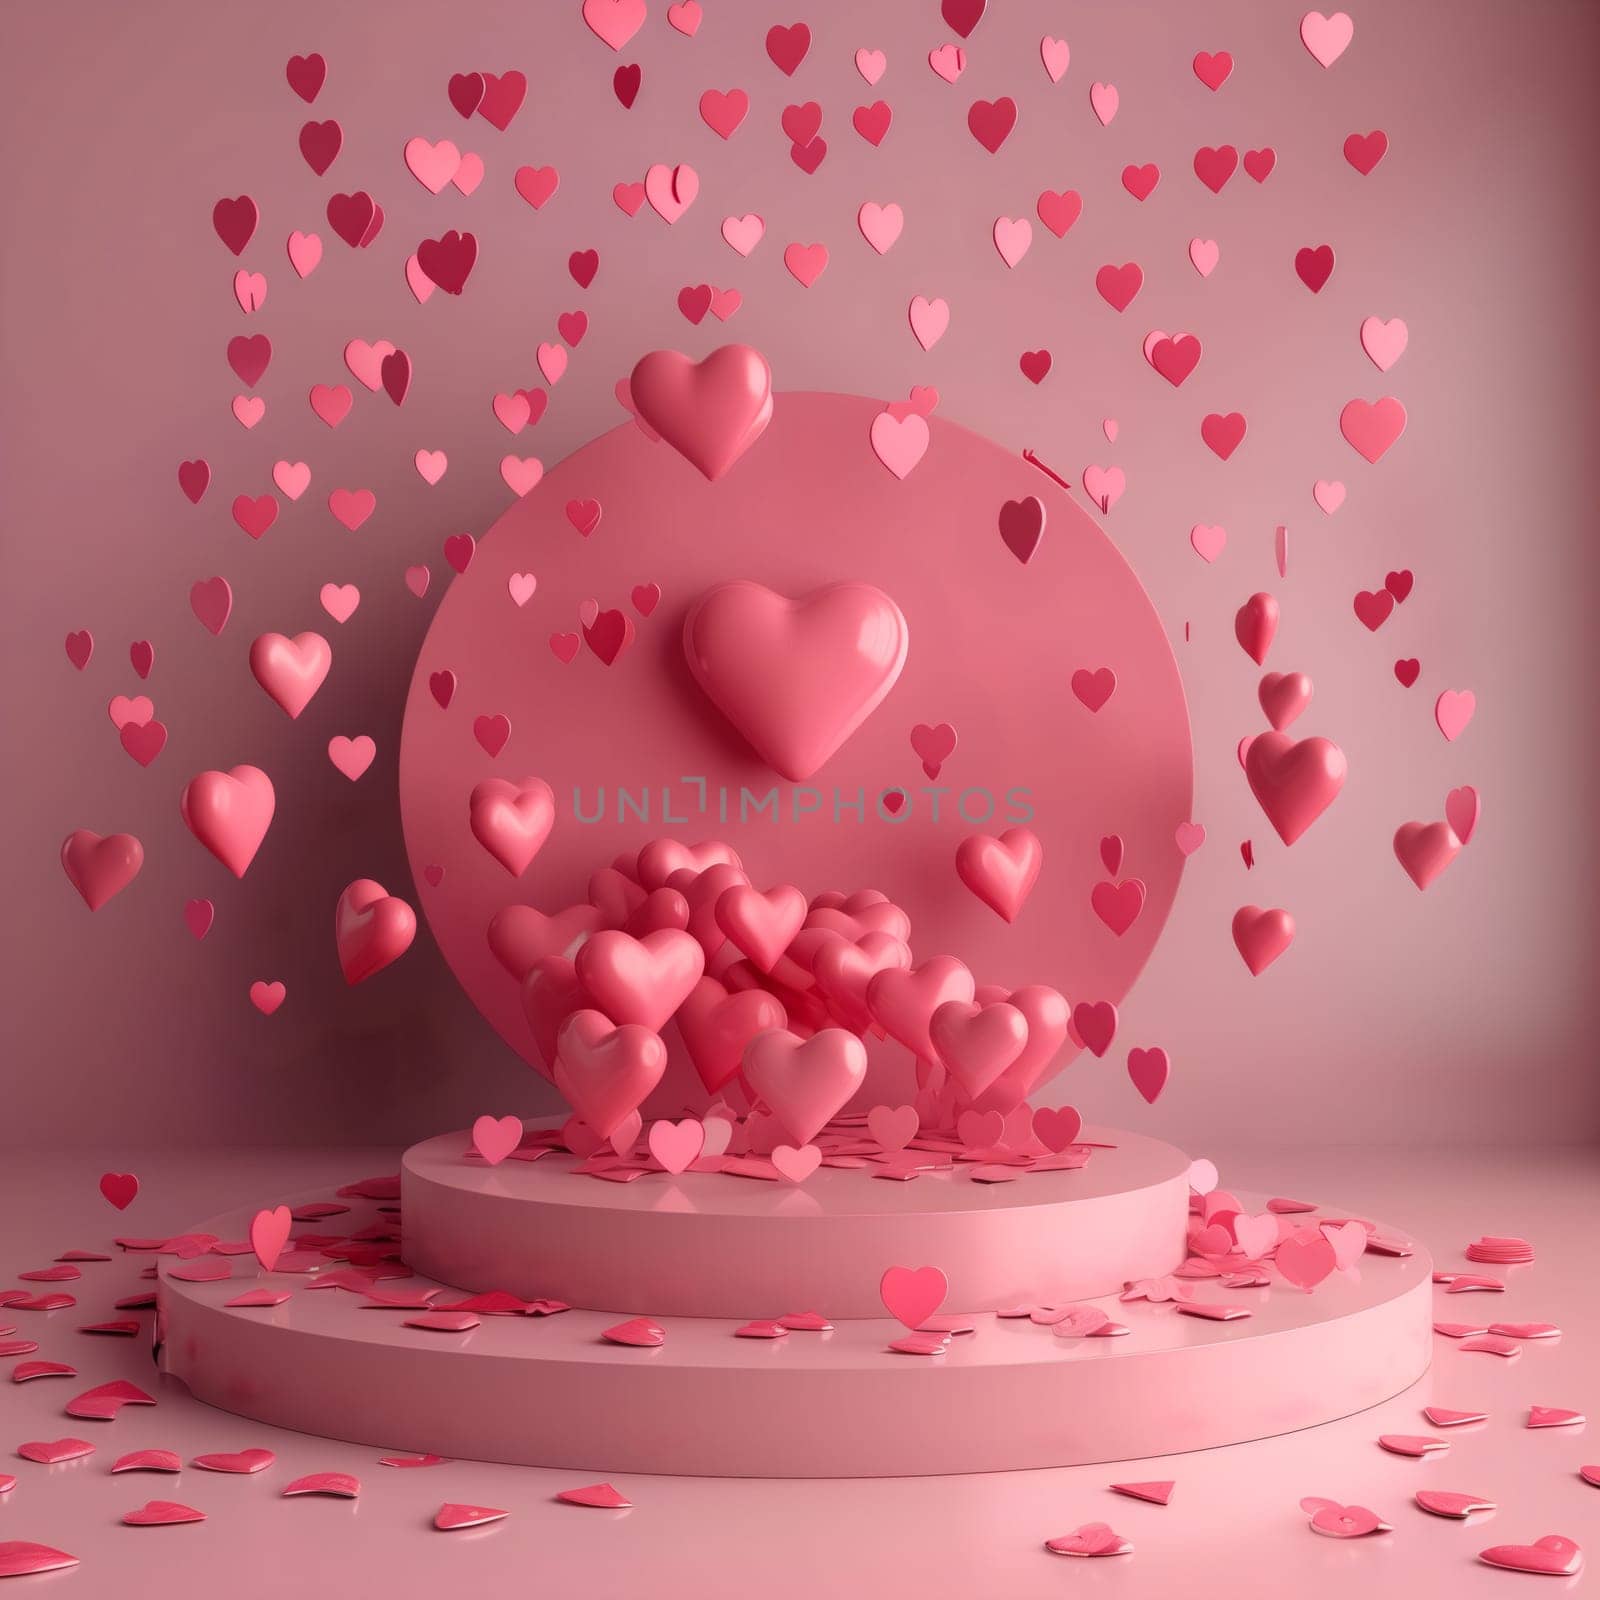 Beautiful delicate background with a decorative stand and a lot of falling hearts on pink, close-up side view.